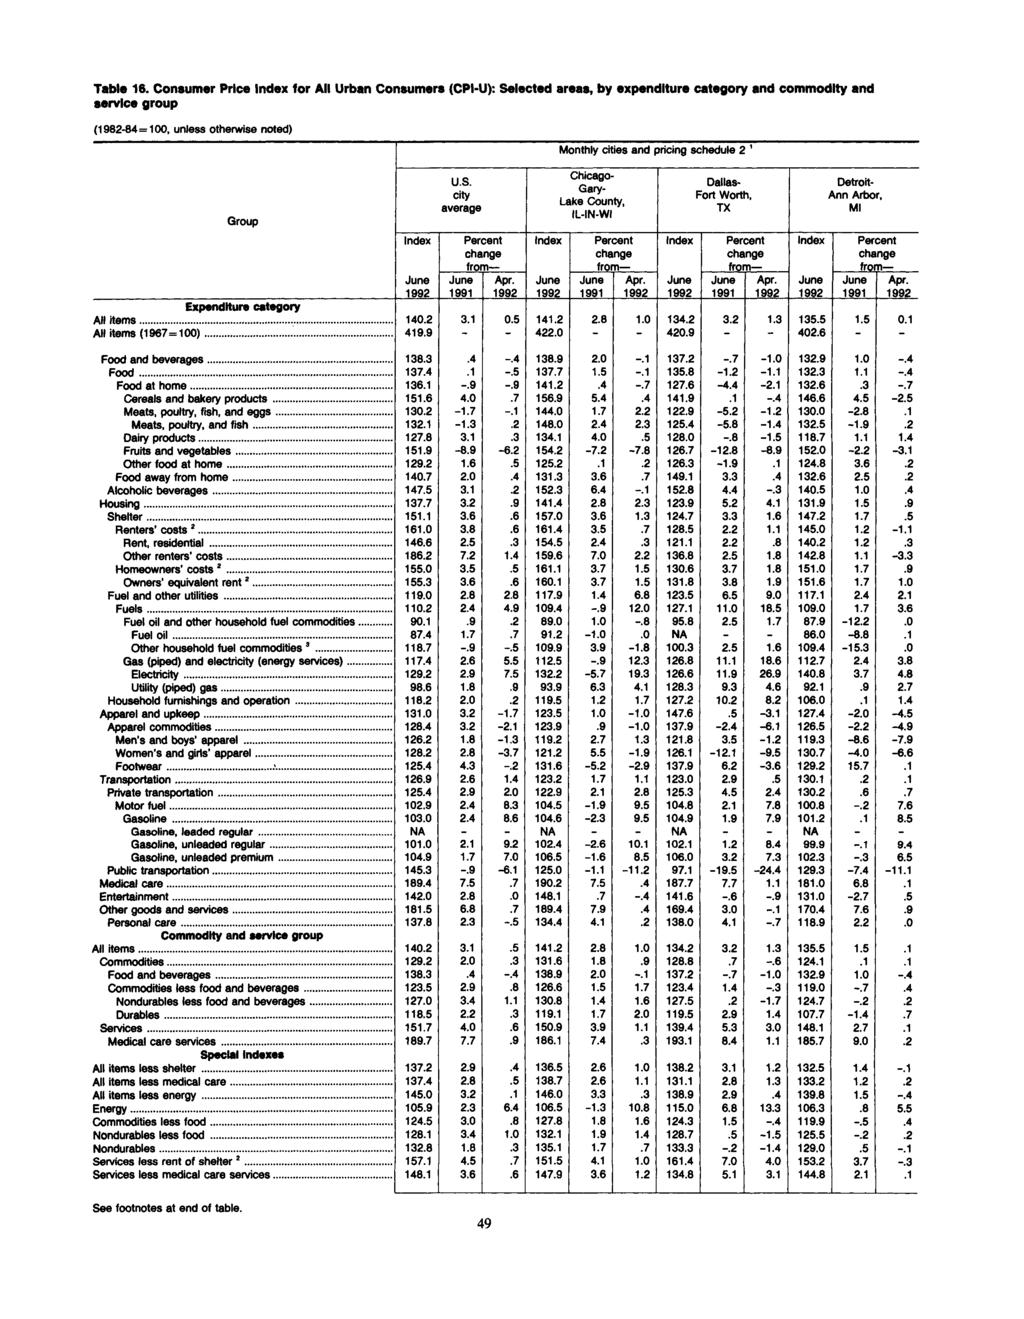 Table 16. Consumer Price for All Urban Consumers (CPI-U): Selected areas, by expenditure category and commodity and service group Monthly cities and pricing schedule 2 1 Group All items.